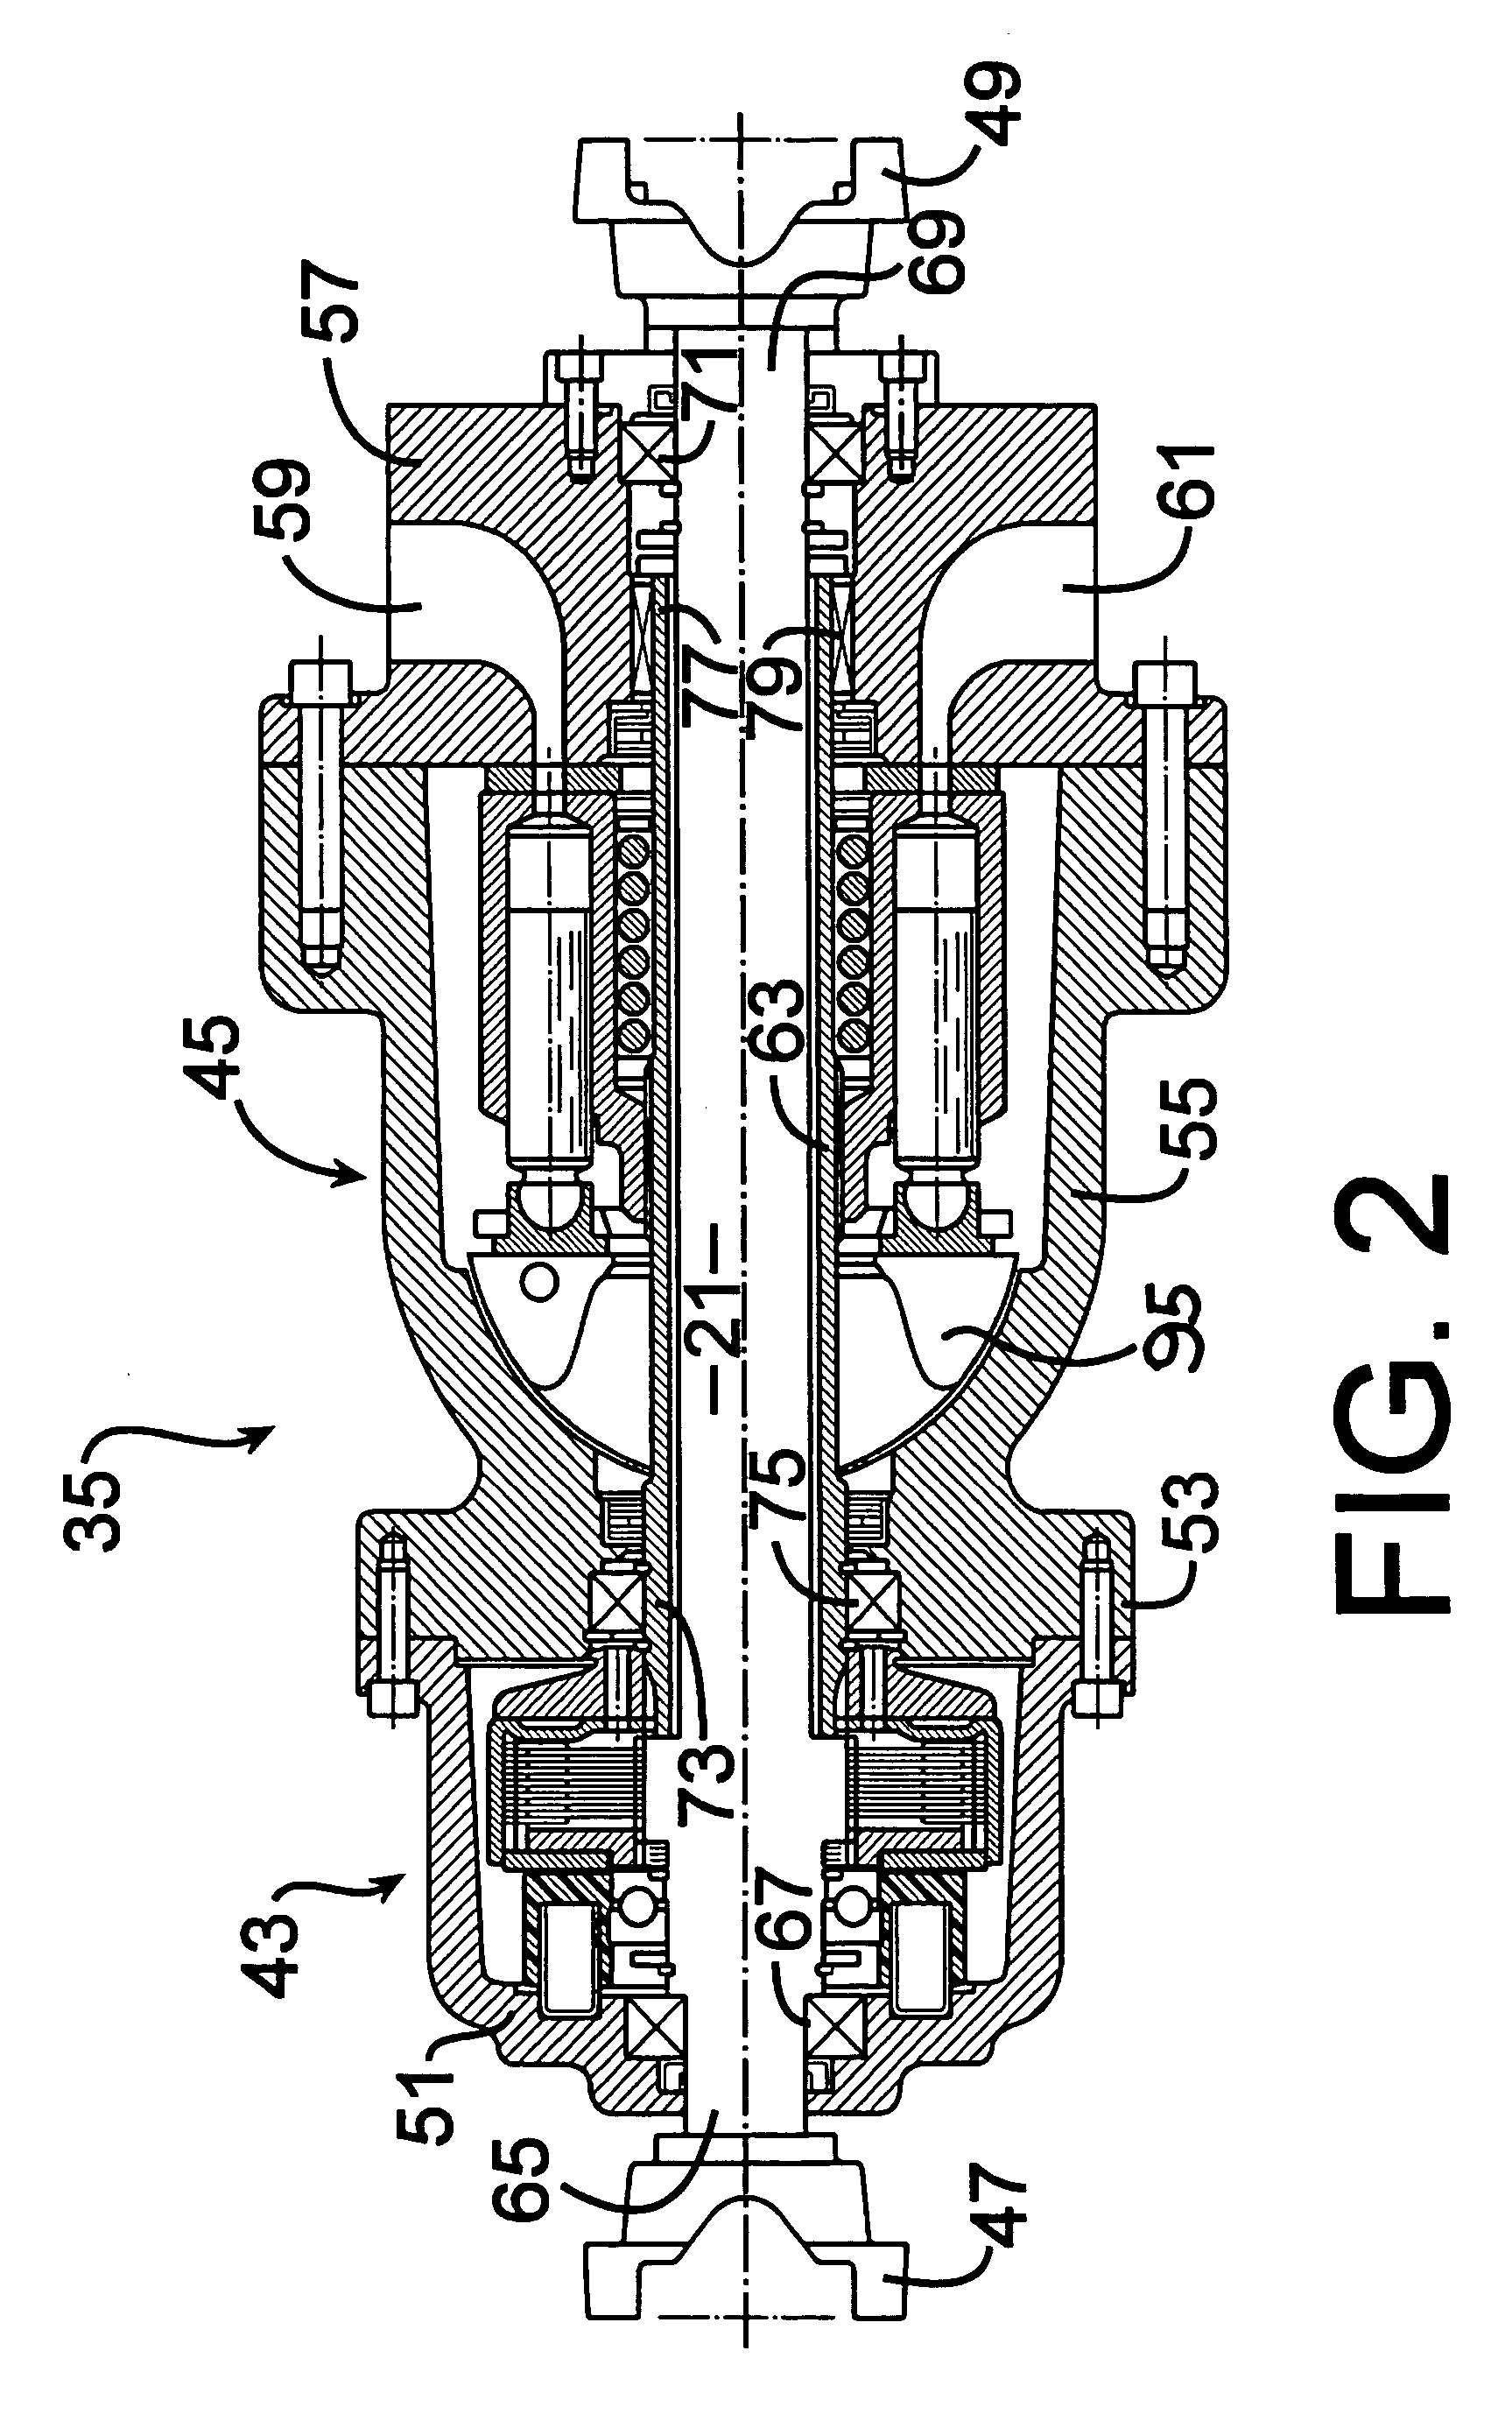 Hydraulic drive system and improved filter sub-system therefor